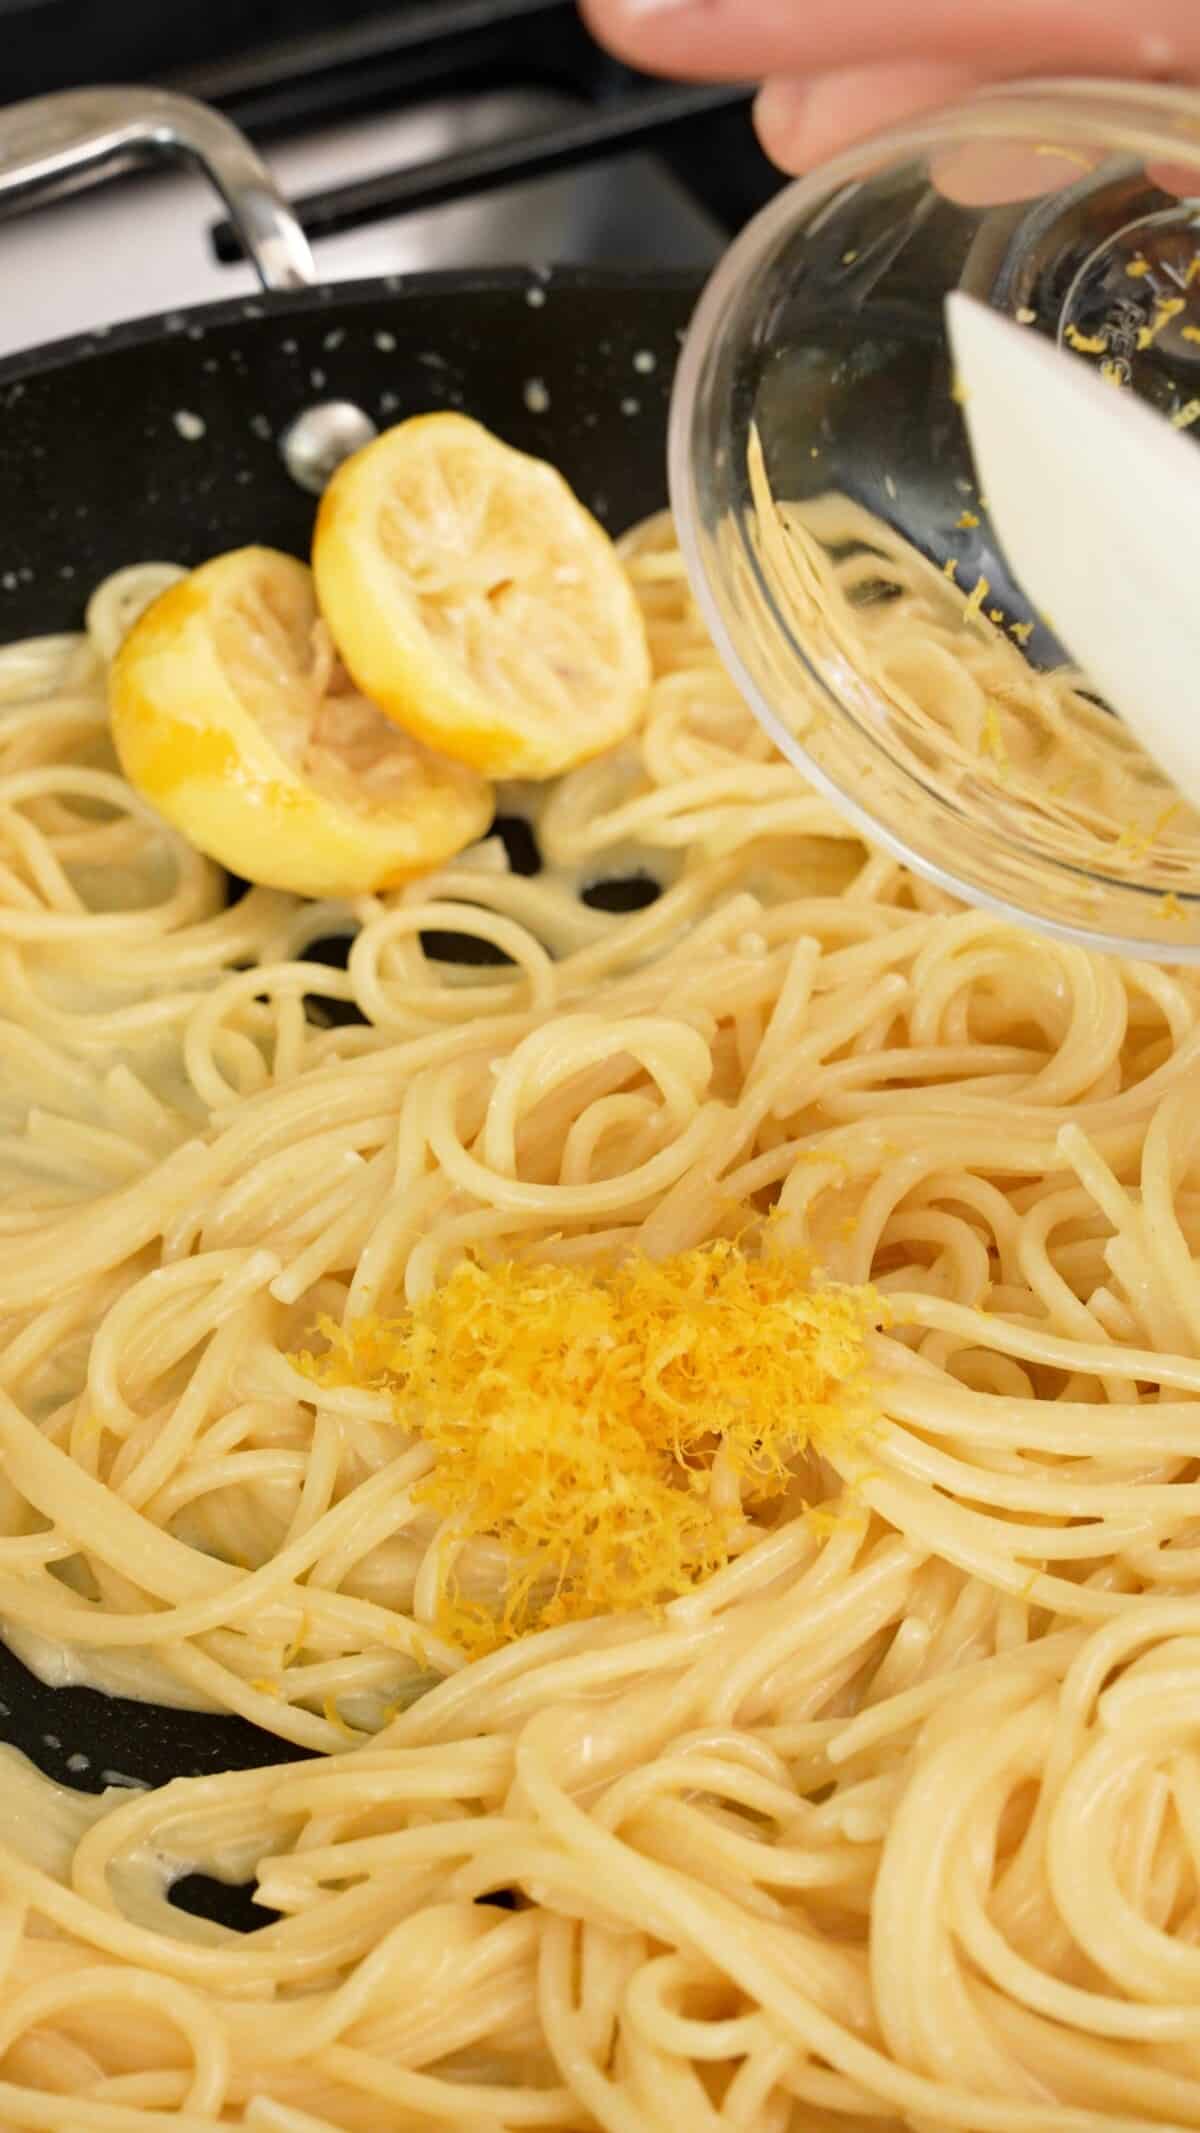 Lemon zest being added to pasta in a pan.